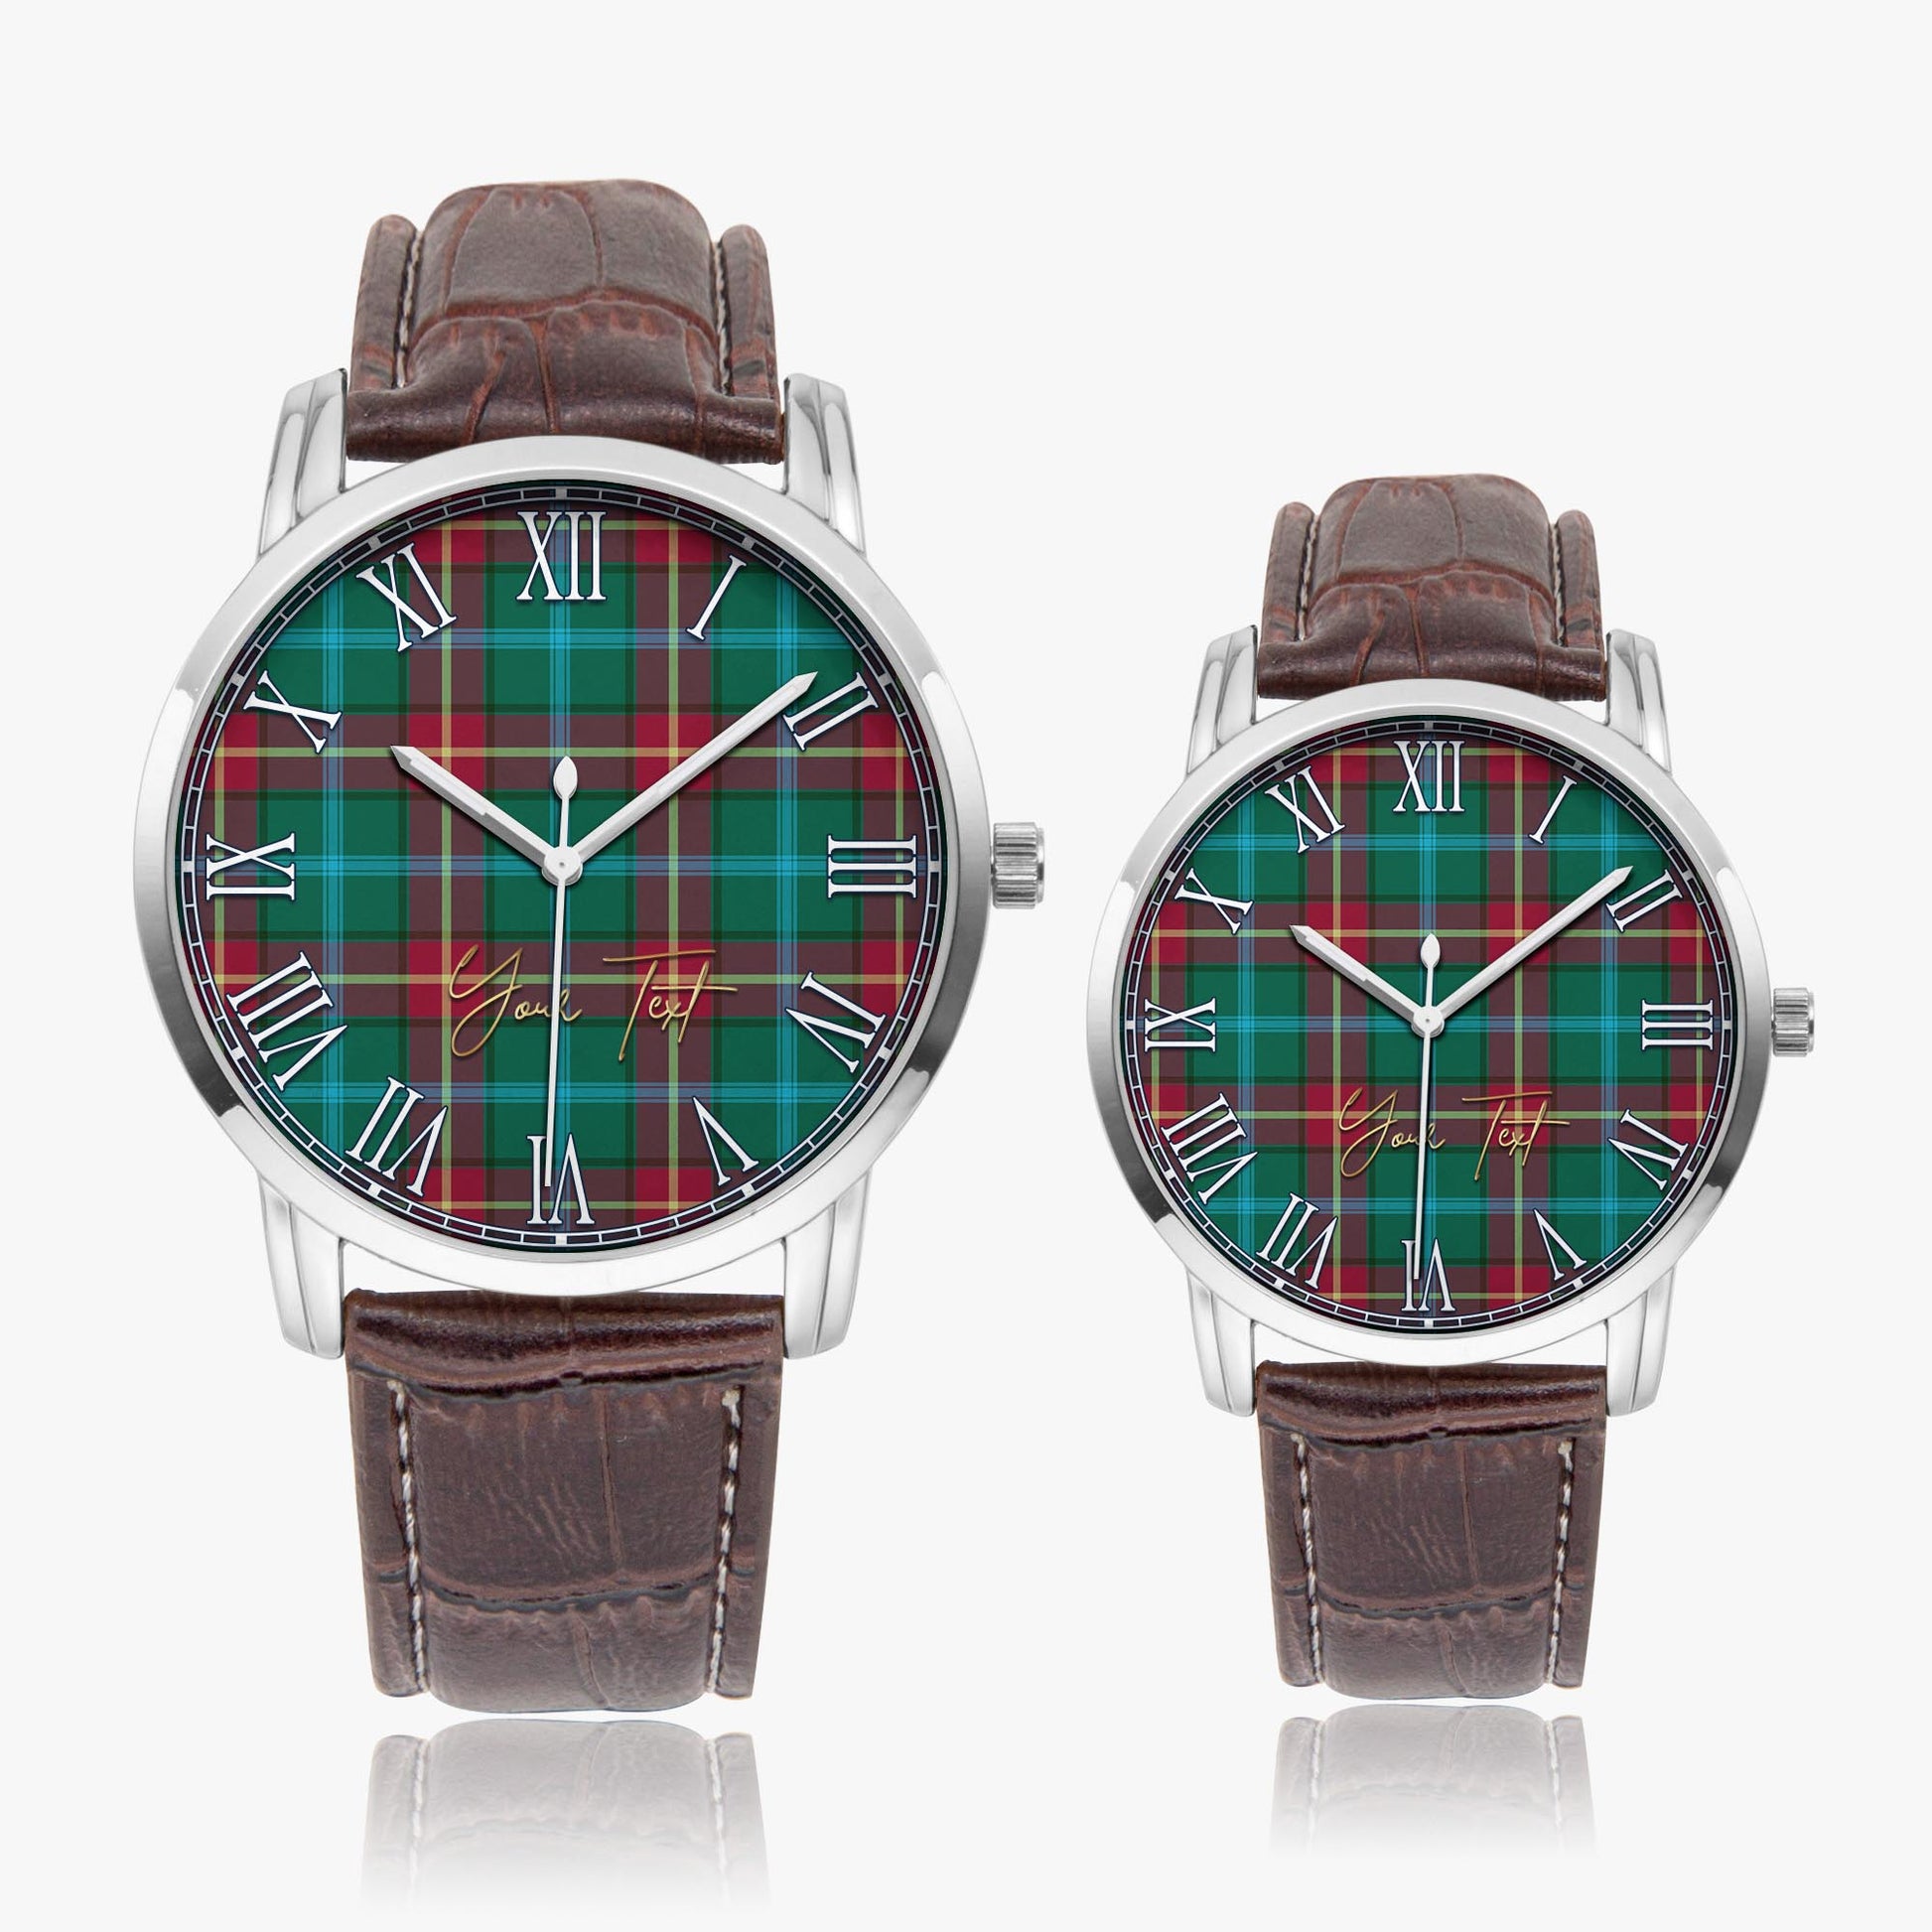 Manitoba Province Canada Tartan Personalized Your Text Leather Trap Quartz Watch Wide Type Silver Case With Brown Leather Strap - Tartanvibesclothing